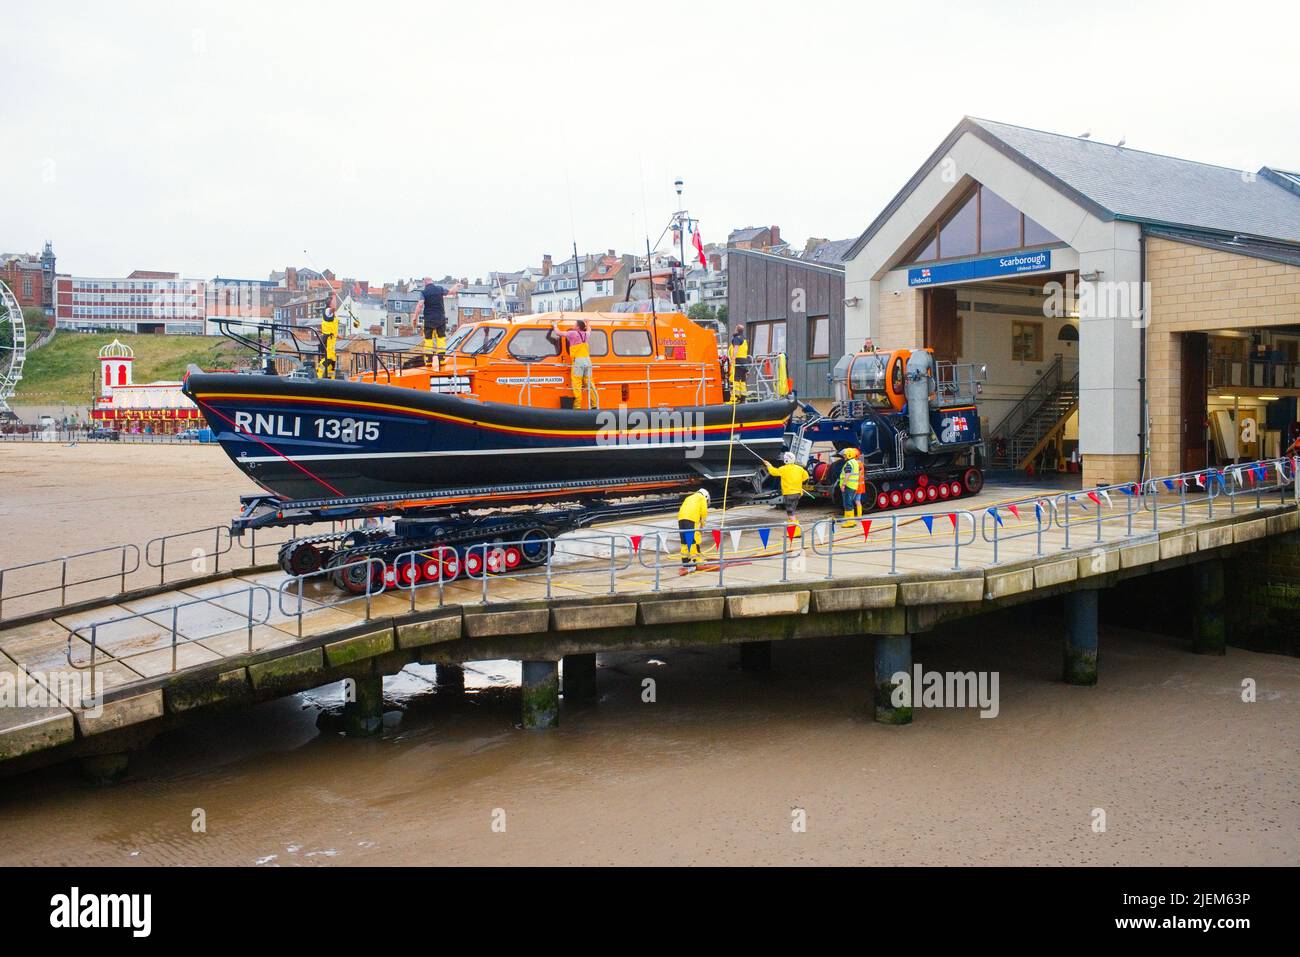 RNLI Lifeboat at Scarborough being washed after a Tuesday evening practice launch and recovery Stock Photo